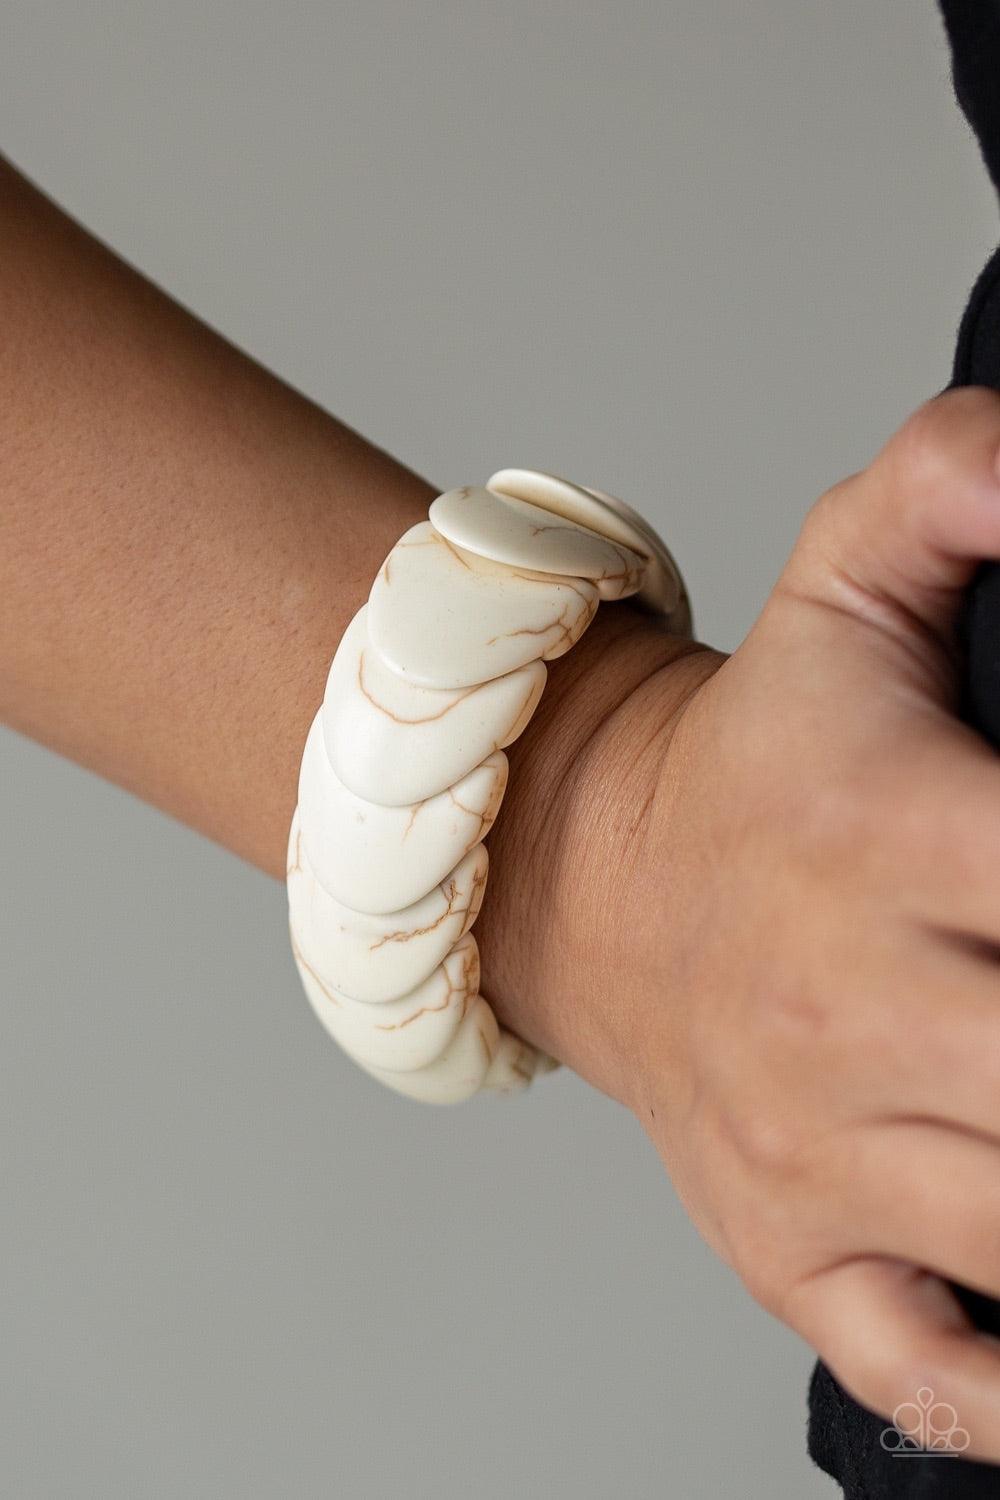 Paparazzi Accessories Normadic Nature - White Overlapping white stones are threaded along stretchy bands around the wrist for an artisan inspired look. Jewelry